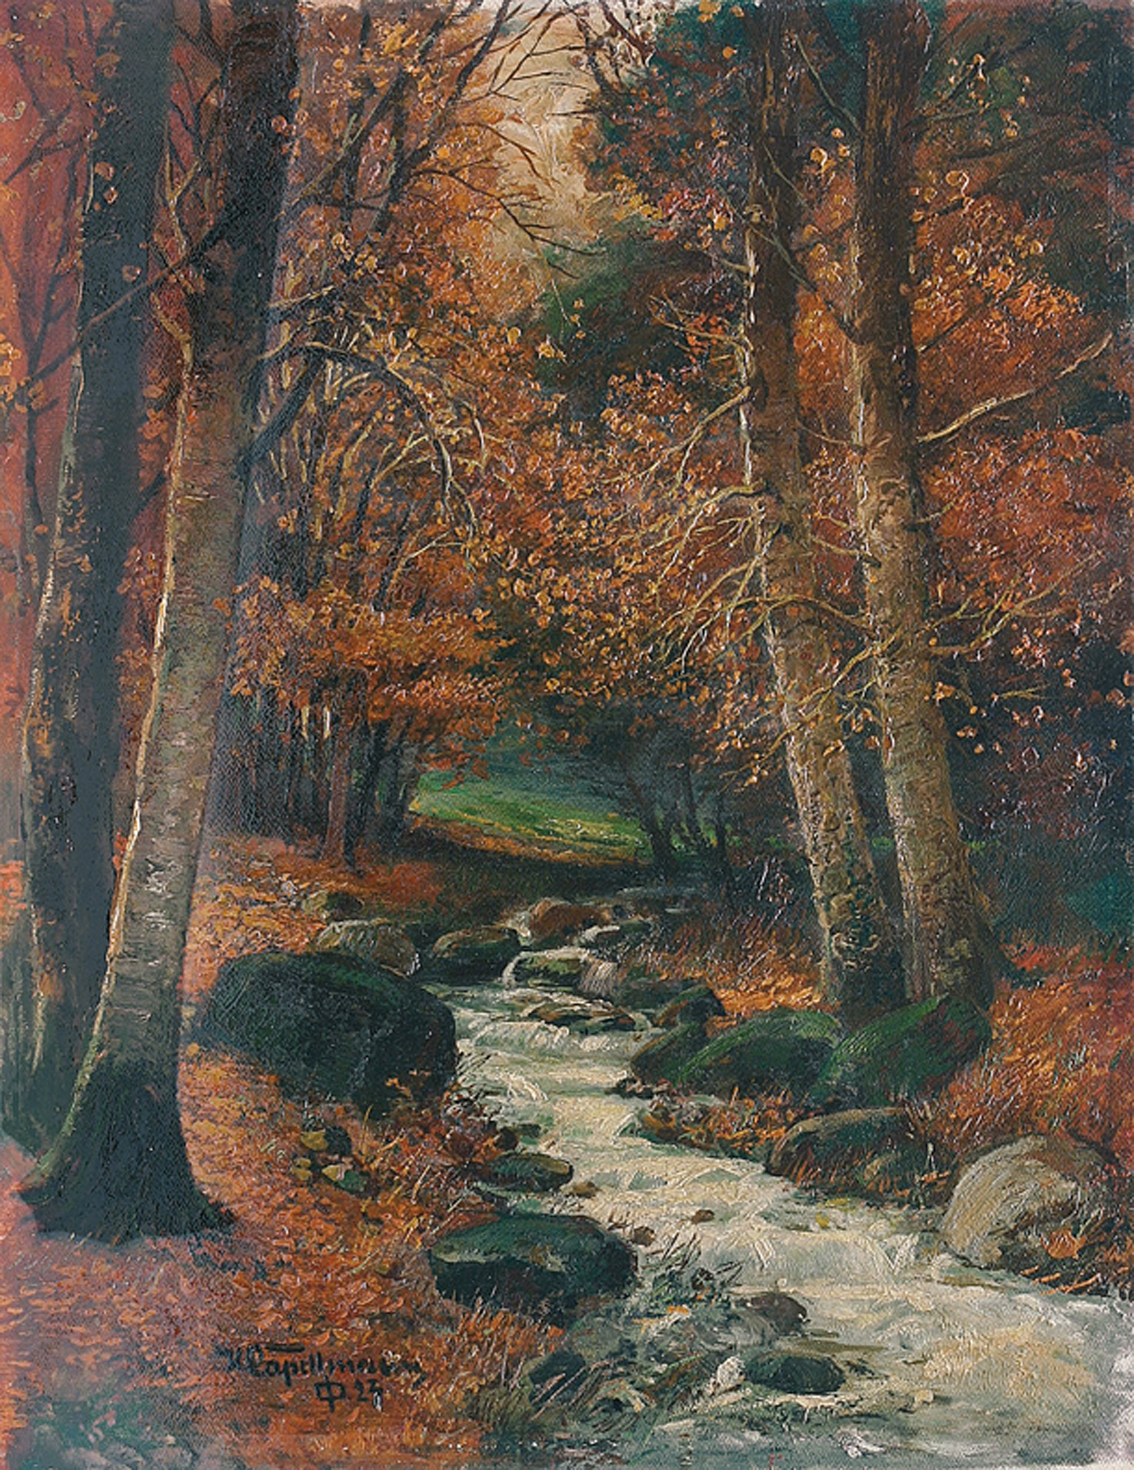 A brook in a forest in autumn time